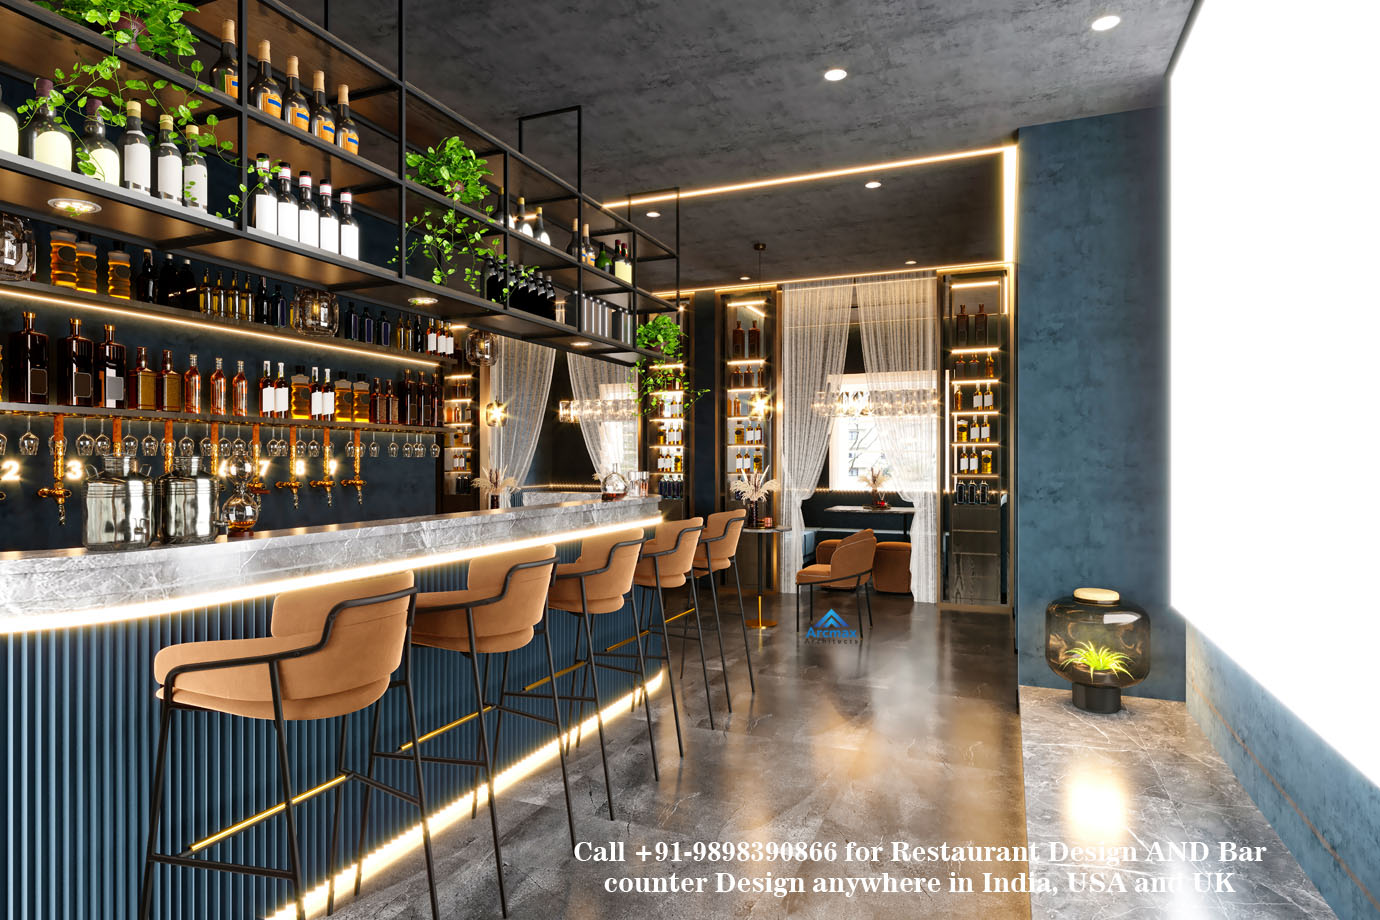 Free Restaurant Design and Bar counter Design Architects in India, USA and UK